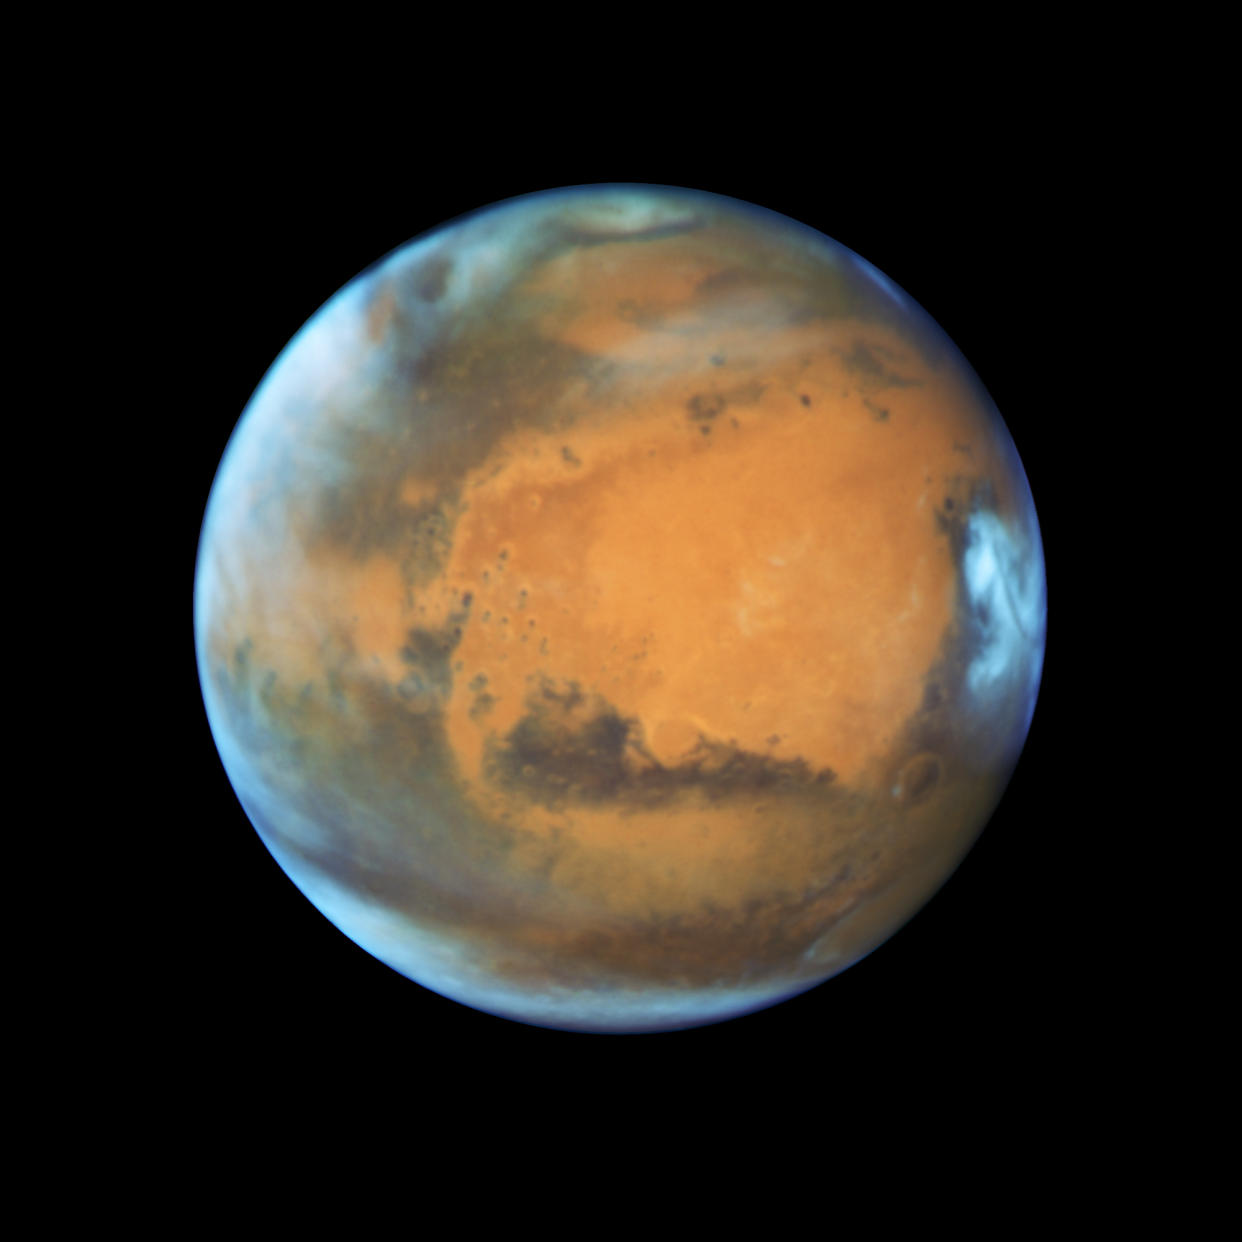 The planet Mars is shown May 12, 2016 in this NASA Hubble Space Telescope view taken May 12, 2016 when it was 50 million miles from Earth. Photo from NASA/Handout via Reuters.